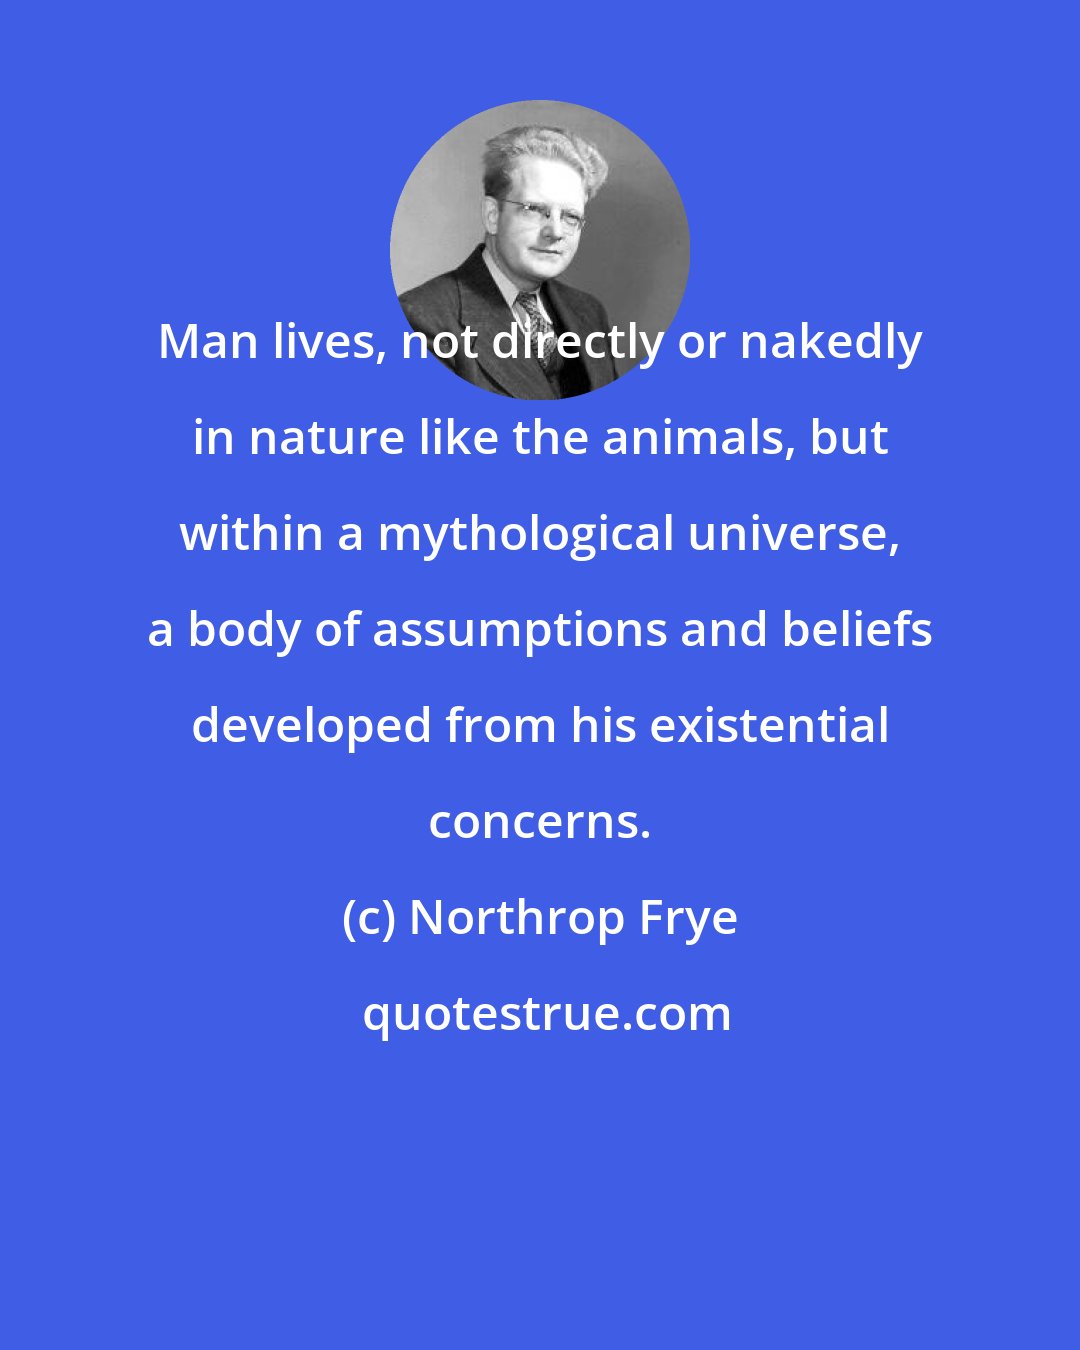 Northrop Frye: Man lives, not directly or nakedly in nature like the animals, but within a mythological universe, a body of assumptions and beliefs developed from his existential concerns.